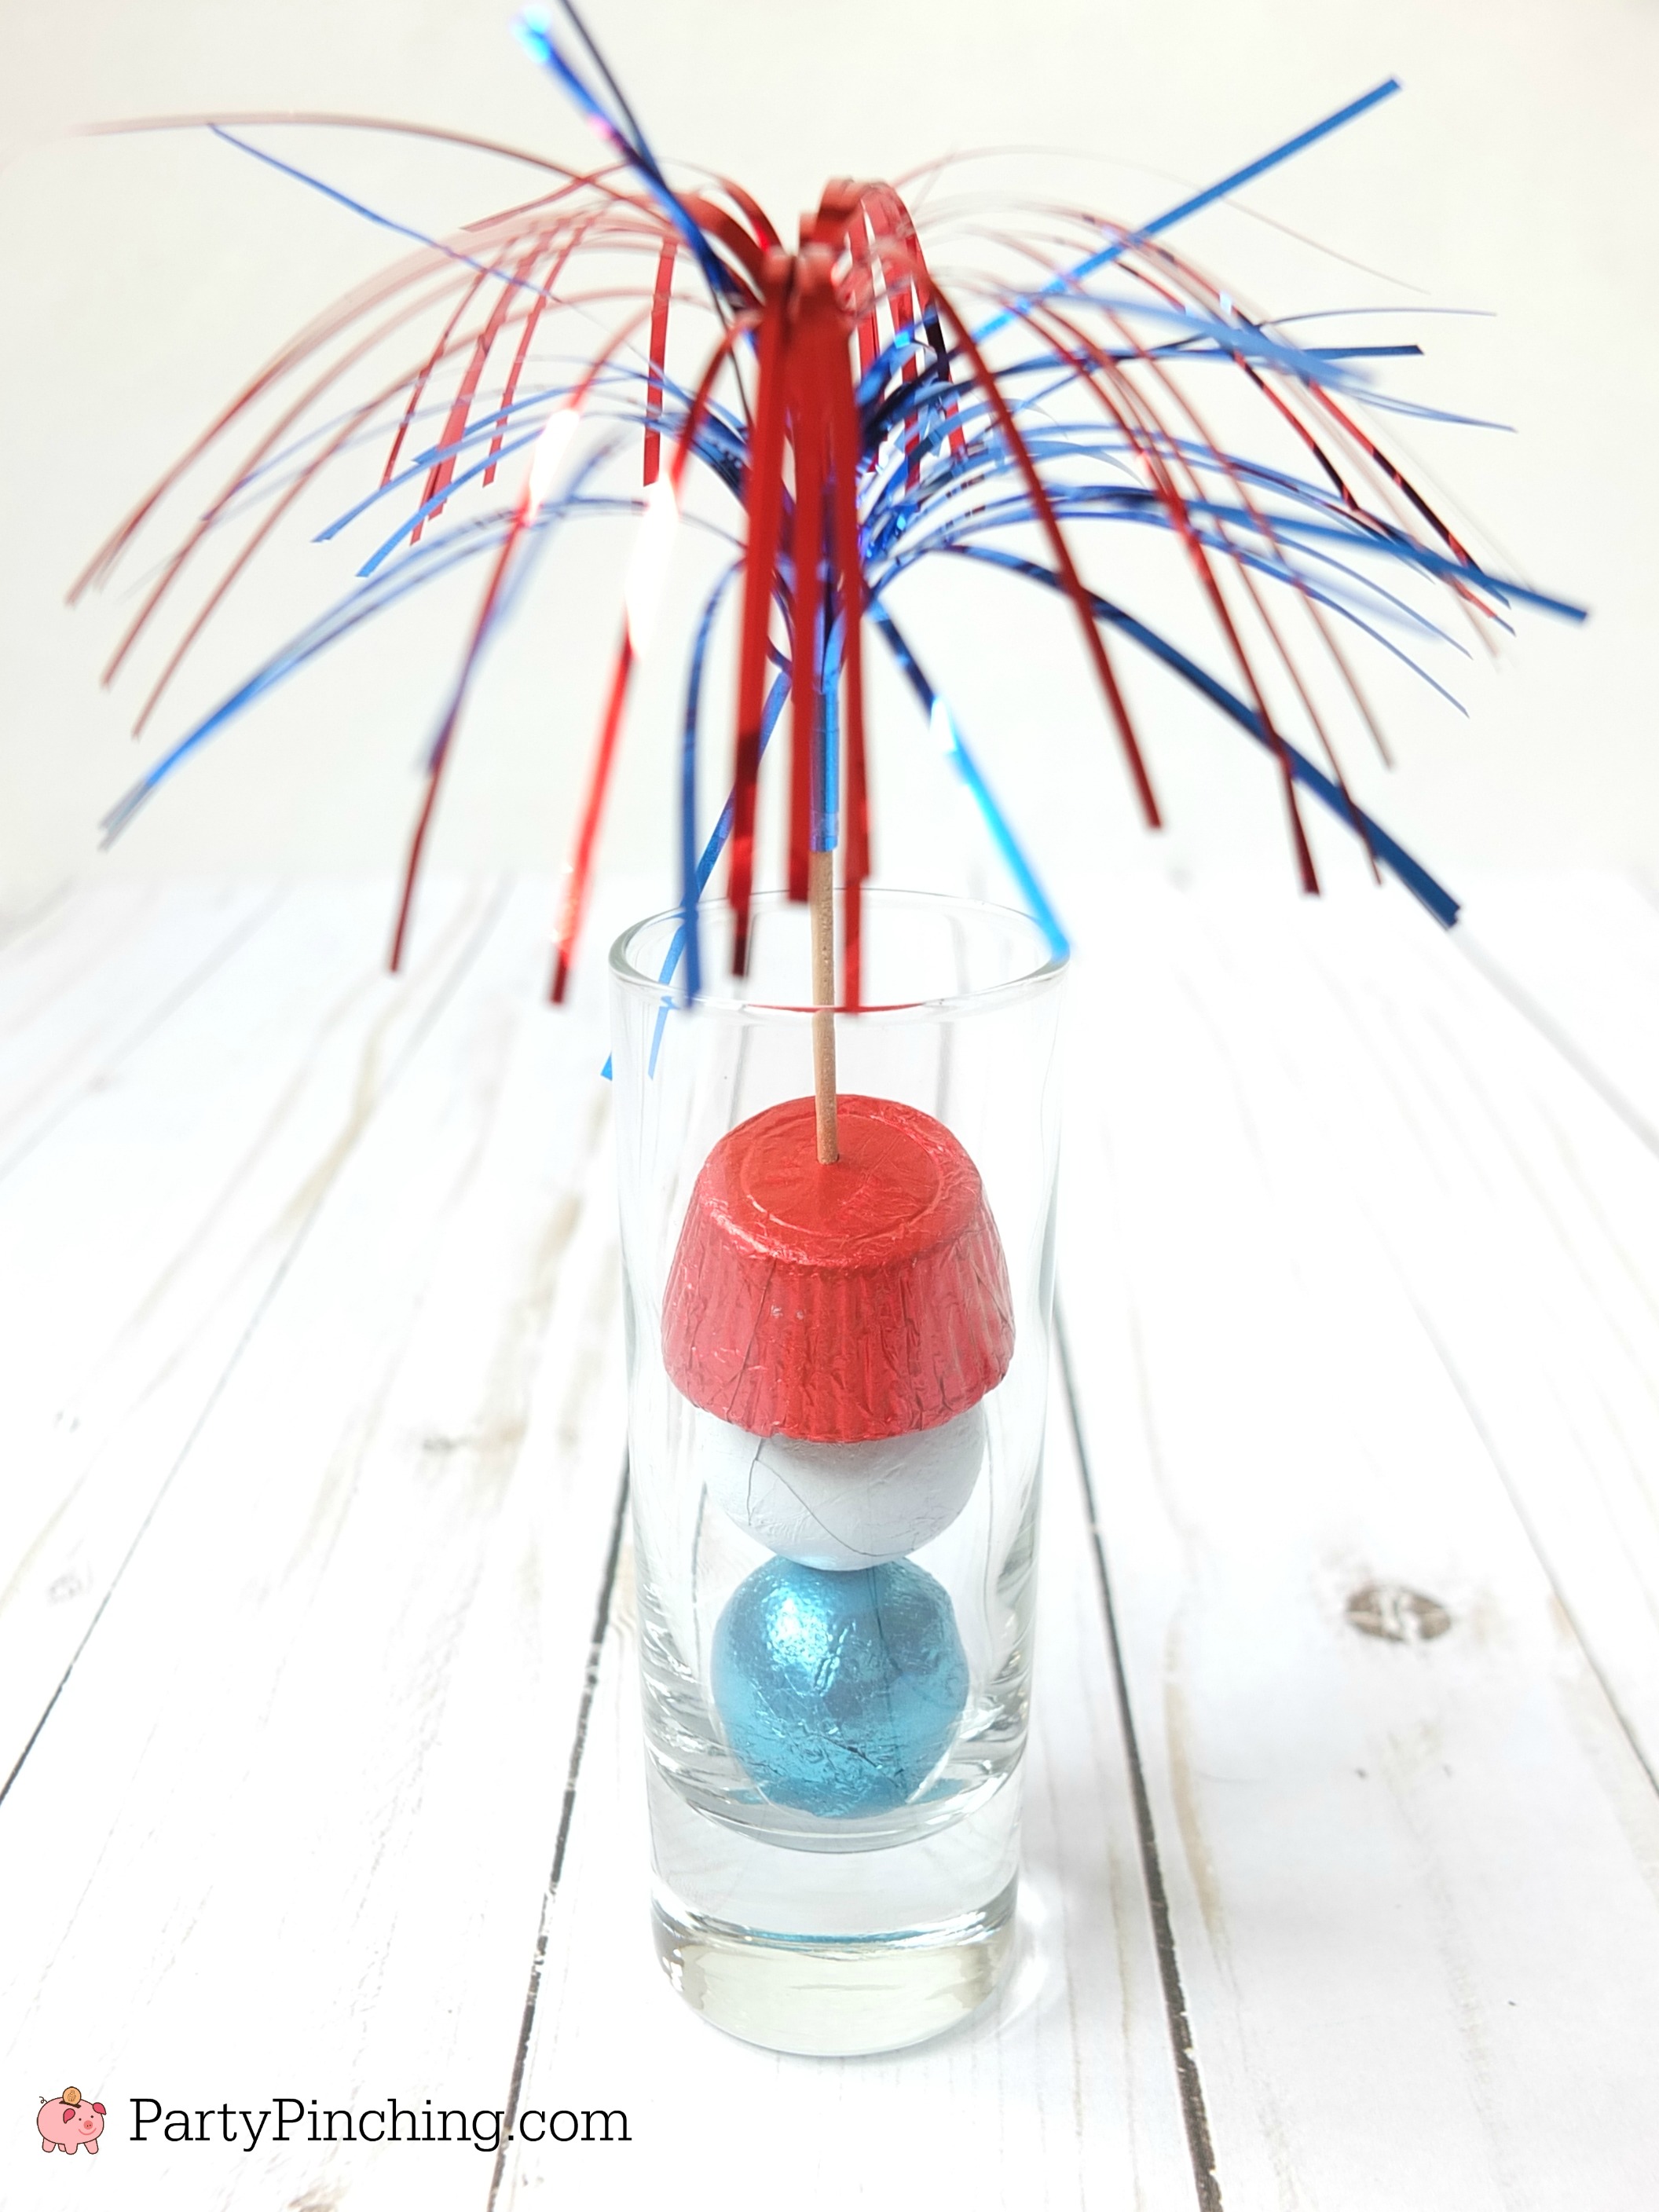 4th of July candy, 4th of July treat ideas, Independence Day party ideas, Memorial Day food ideas, cute food, fun food for kids, firecracker candy, easy recipe ideas for 4th of July, RM Palmer candy red white blue